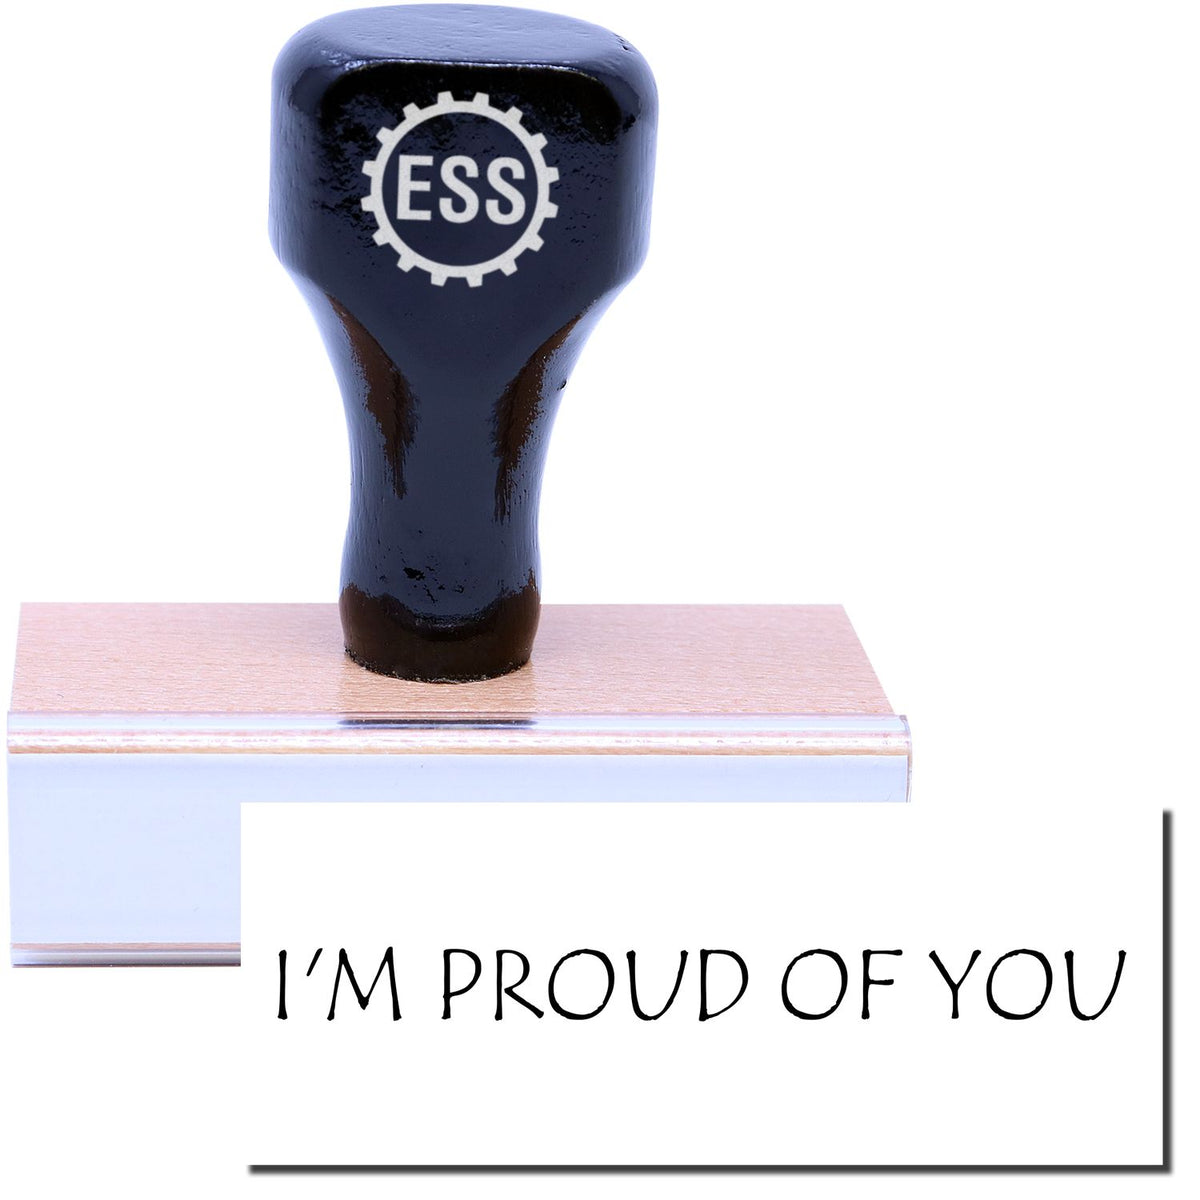 A stock office rubber stamp with a stamped image showing how the text &quot;I&#39;M PROUD OF YOU&quot; in a large font is displayed after stamping.